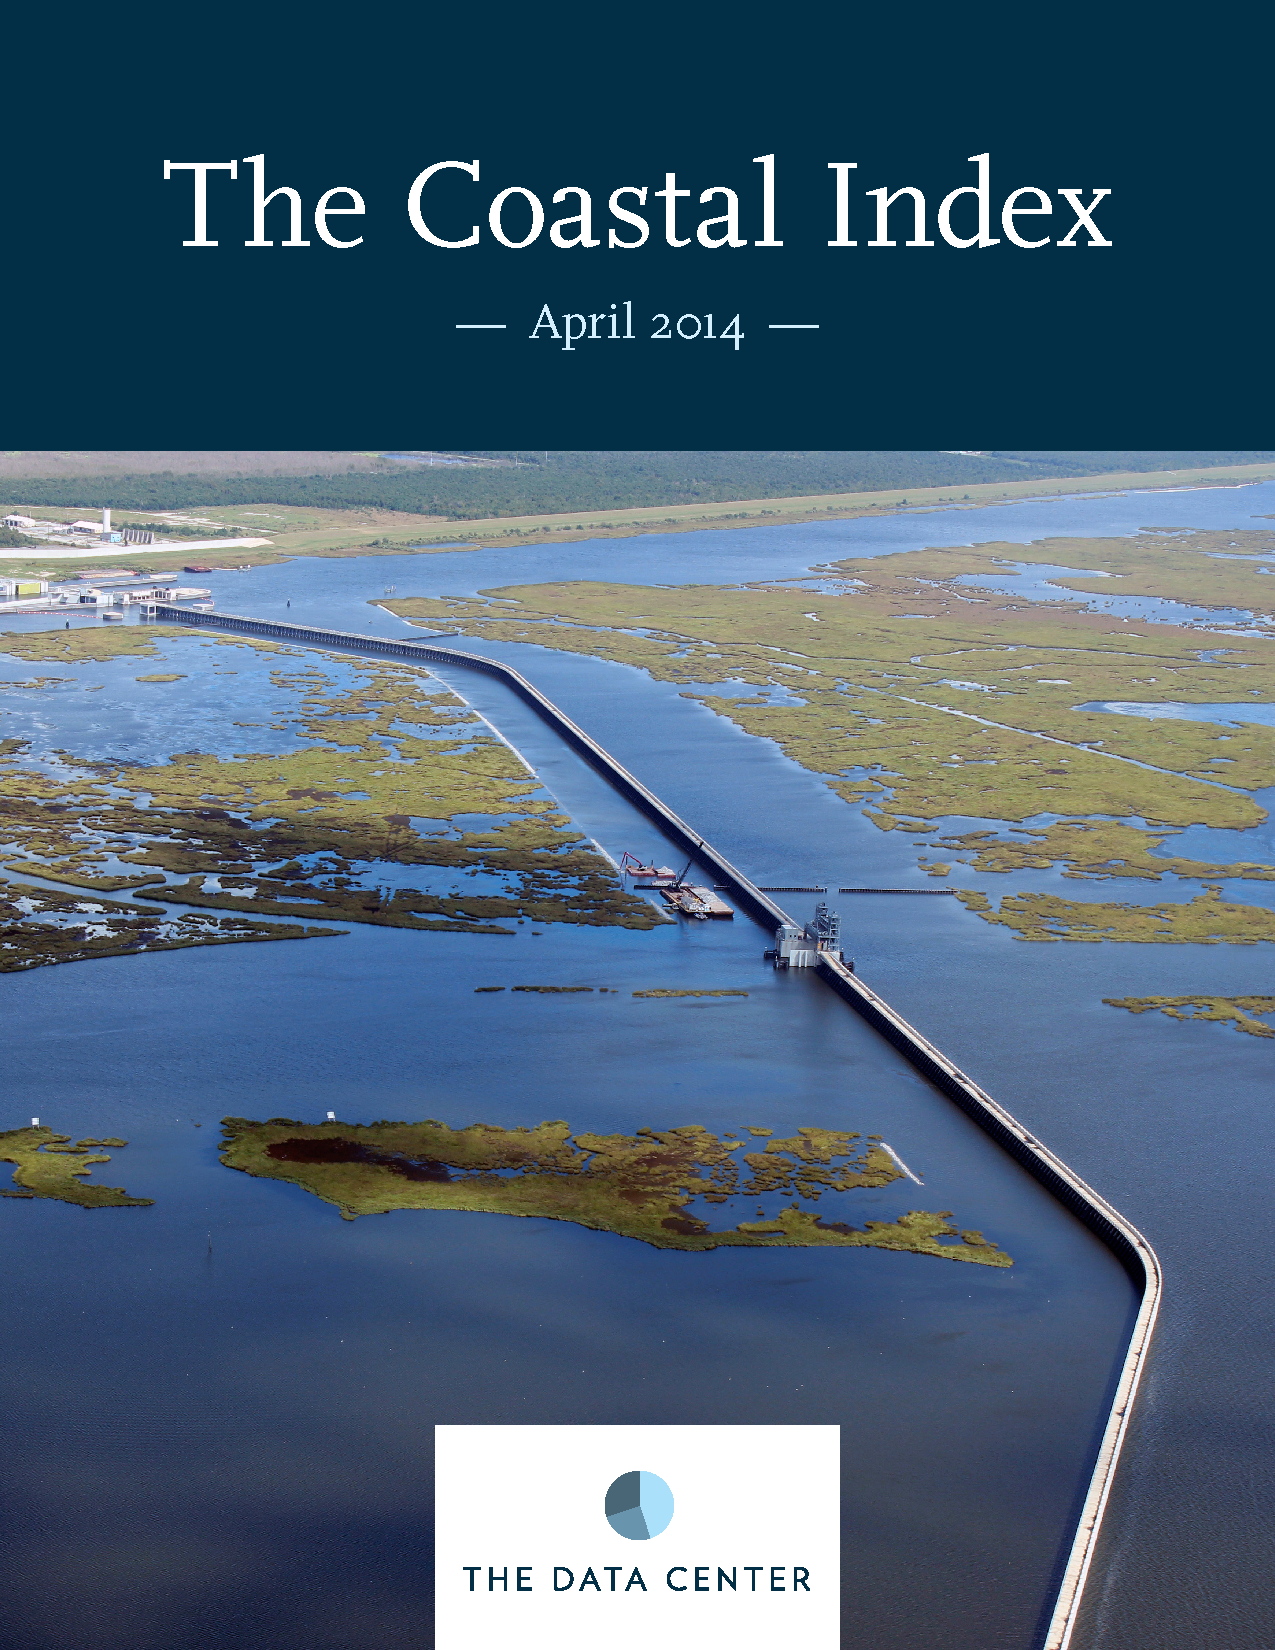 The Coastal Index: The Problem and Possibility of Our Coast